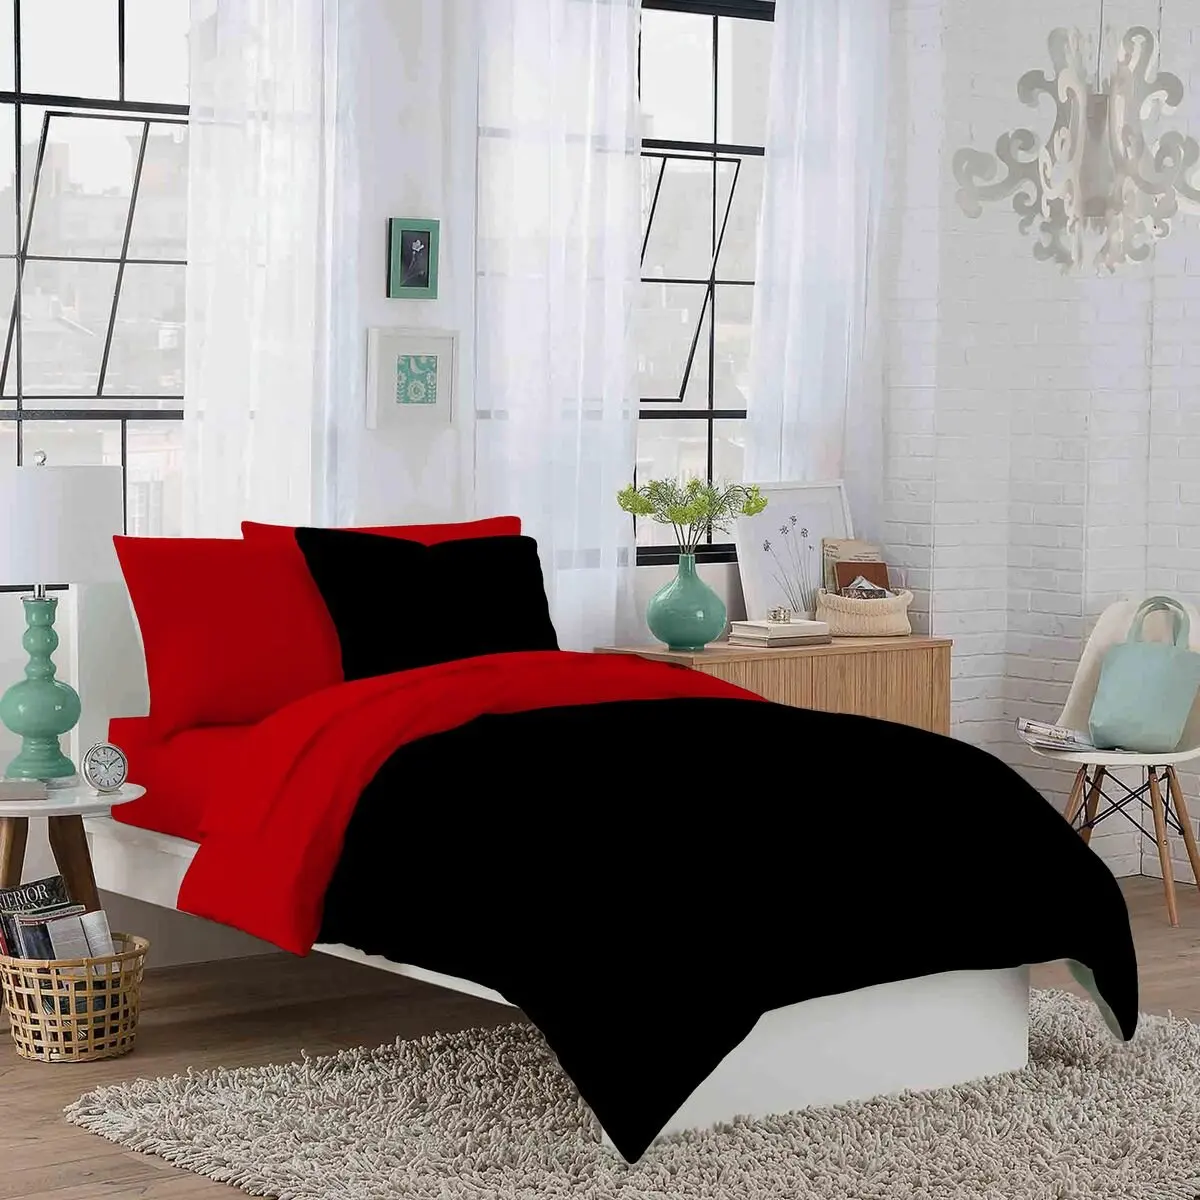 Cheap Red Twin Bedding Set Find Red Twin Bedding Set Deals On Line At Alibaba Com